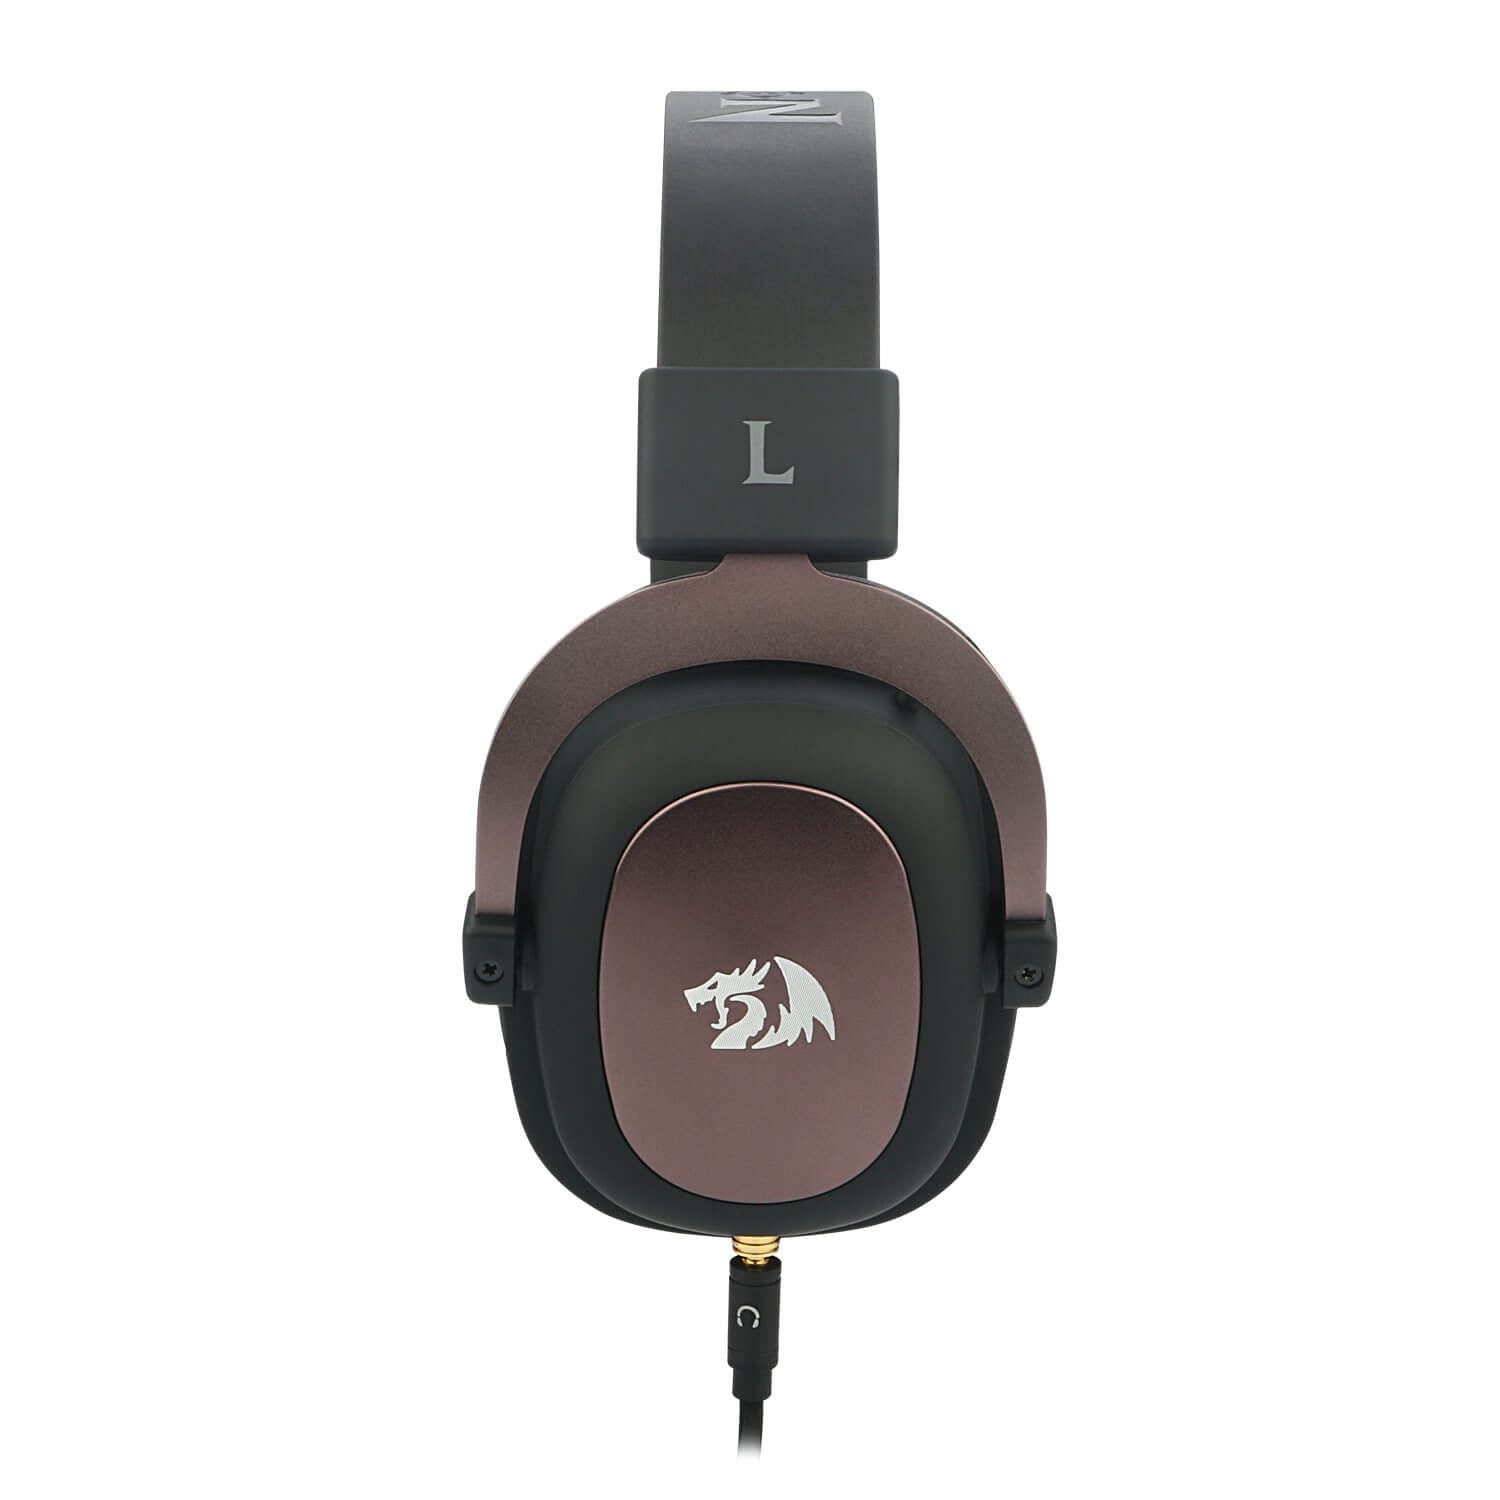 Redragon H510-1 Zeus 2 Wired Gaming Headset - 7.1 Surround Sound - Memory Foam Ear Pads - 53MM Drivers - Detachable Microphone - Multi-Platforms Headphone - Works with PC, PS4/3 & Xbox One/Series X, NS